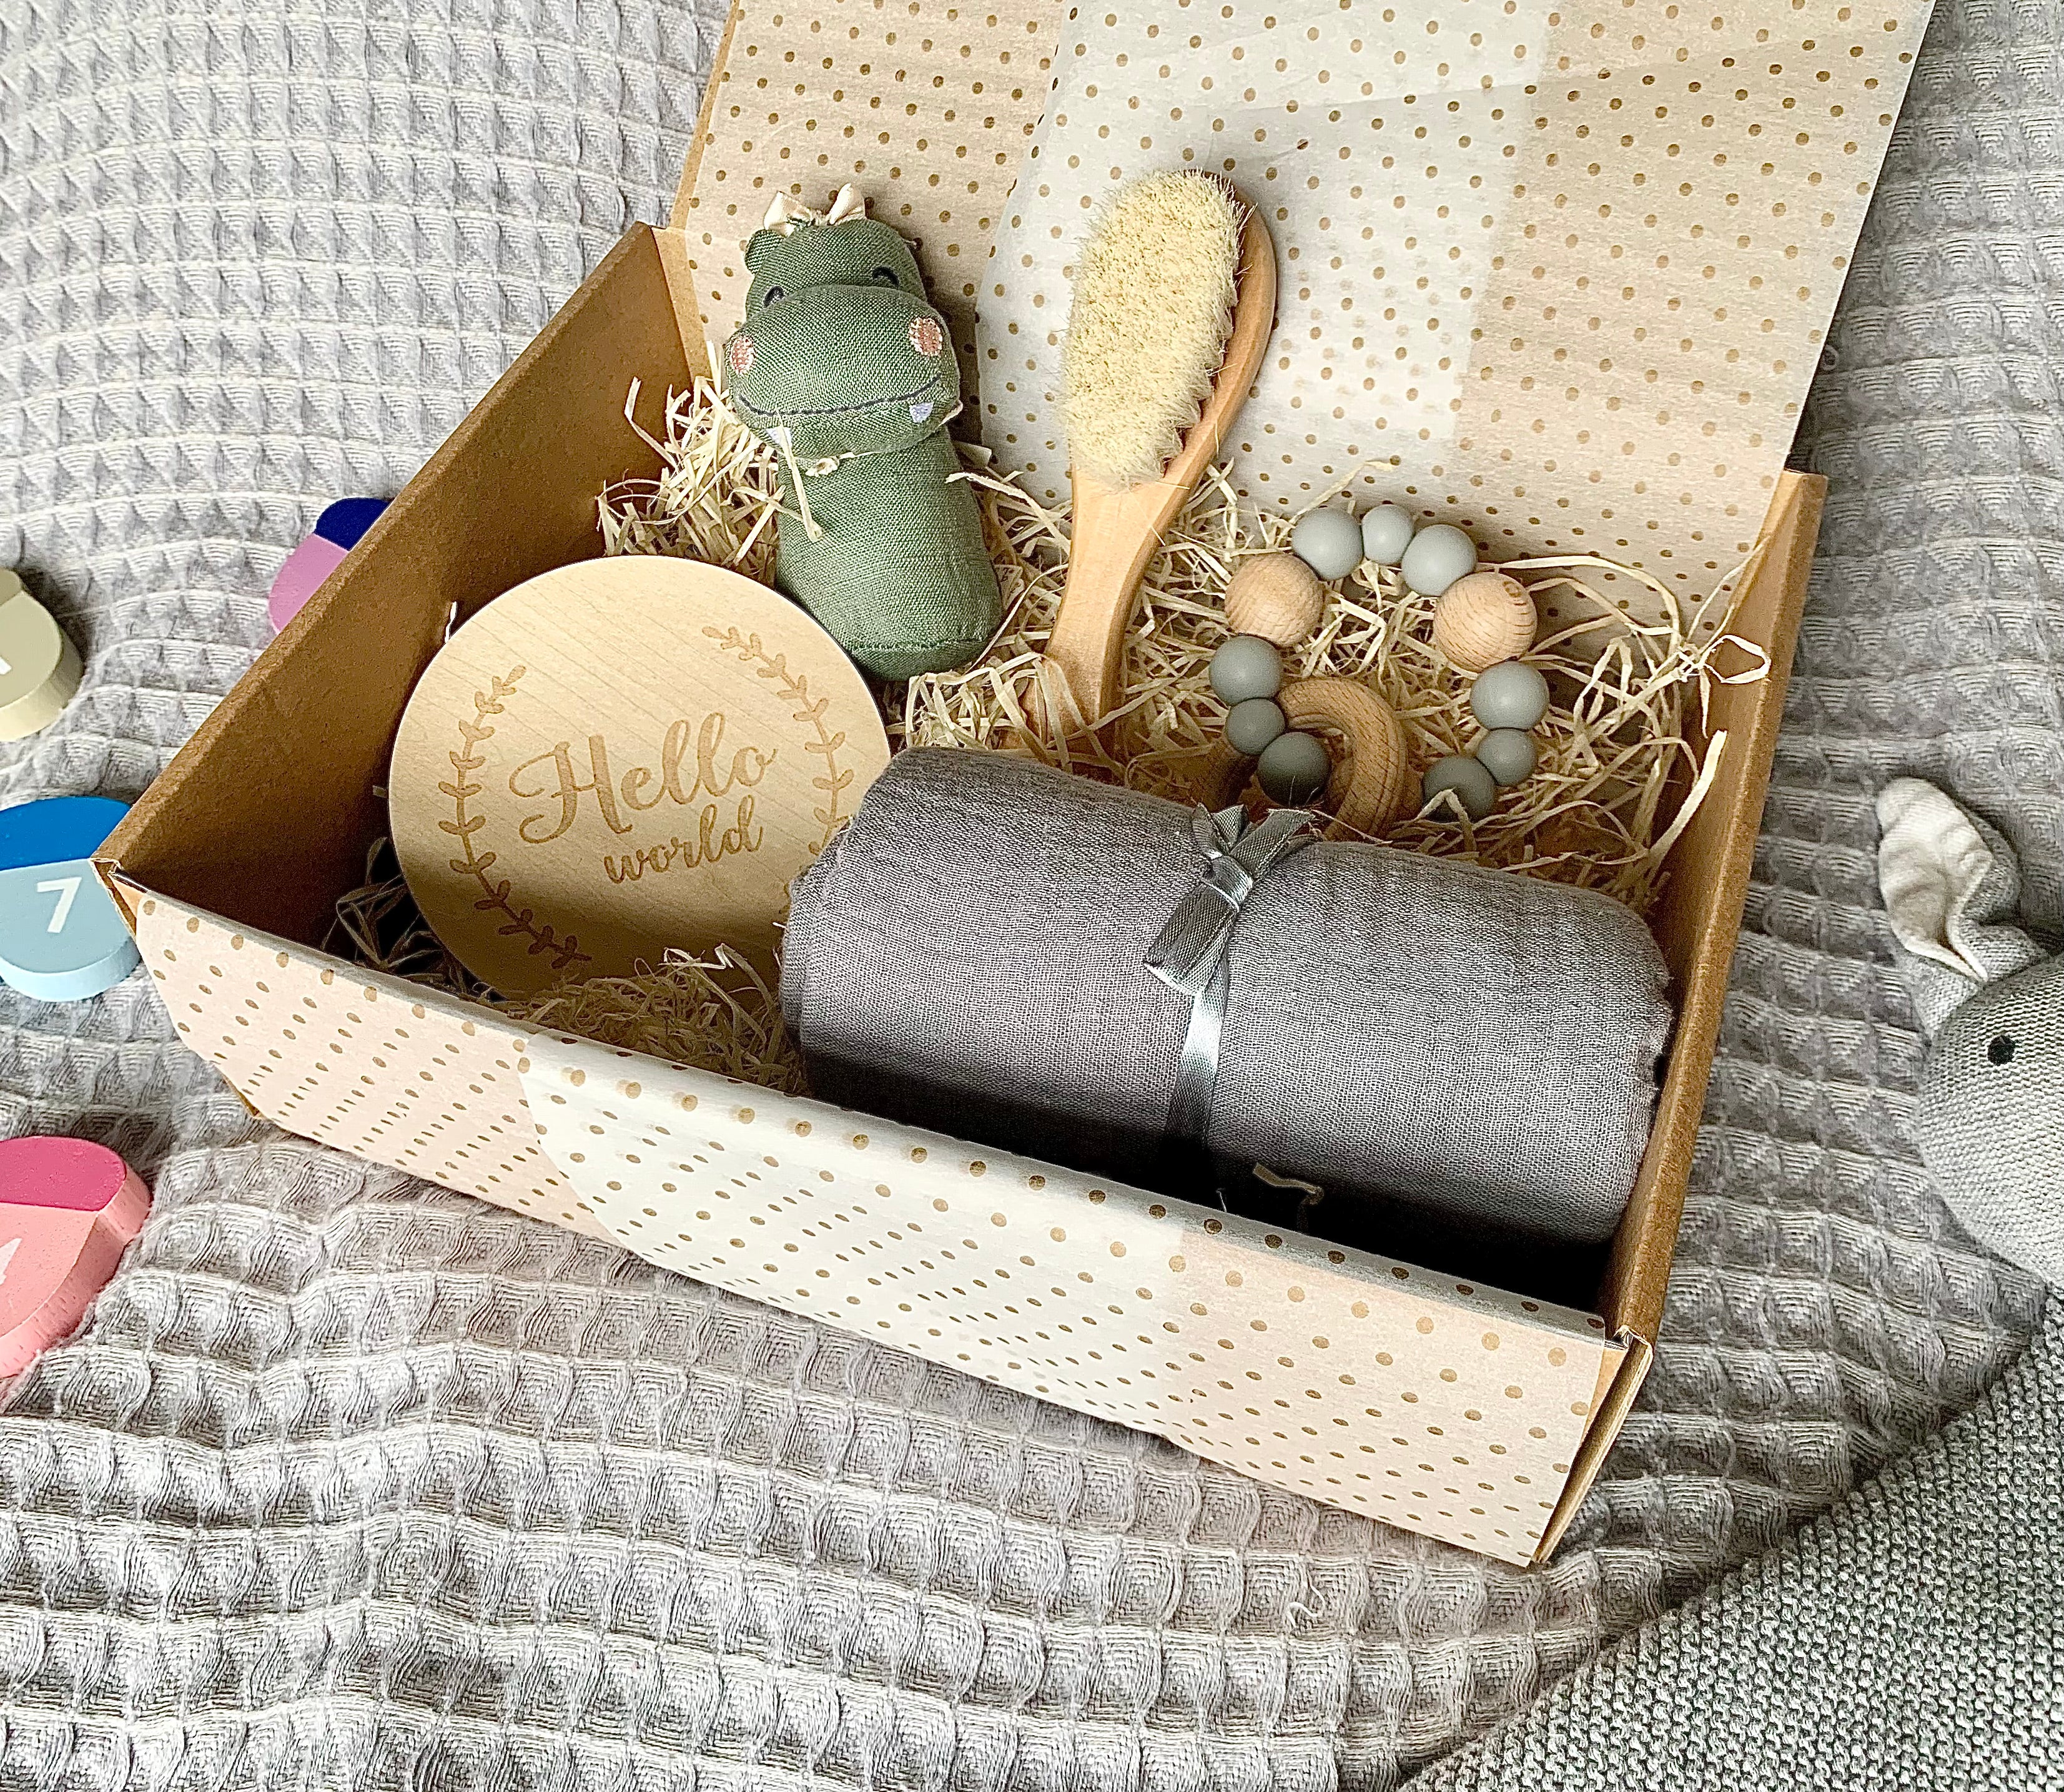 Classic newborn gift box with rattle, brush, teether, announcement disc and muslin